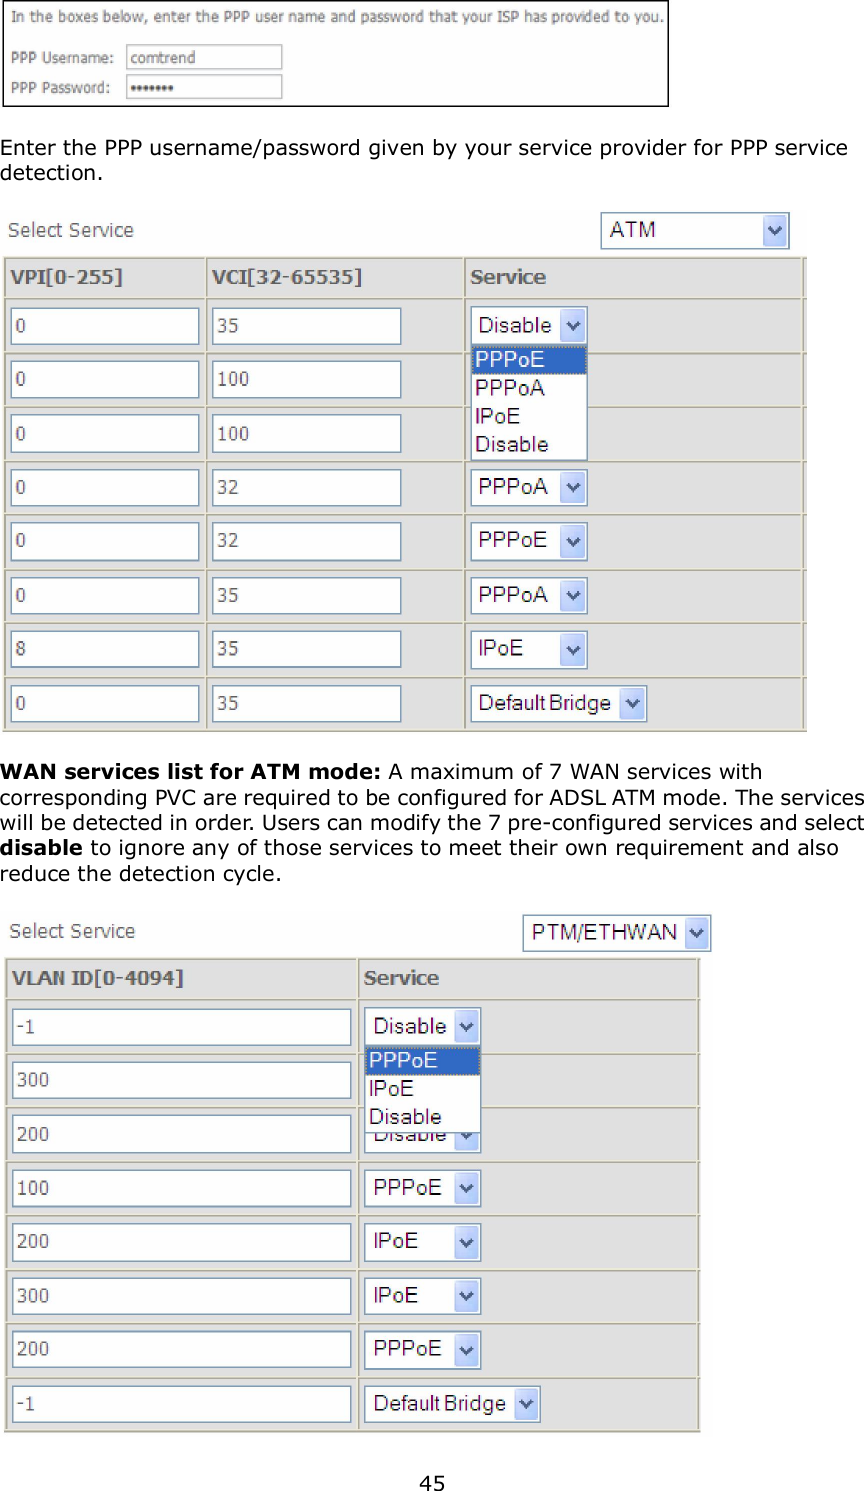  45   Enter the PPP username/password given by your service provider for PPP service detection.    WAN services list for ATM mode: A maximum of 7 WAN services with corresponding PVC are required to be configured for ADSL ATM mode. The services will be detected in order. Users can modify the 7 pre-configured services and select disable to ignore any of those services to meet their own requirement and also reduce the detection cycle.   